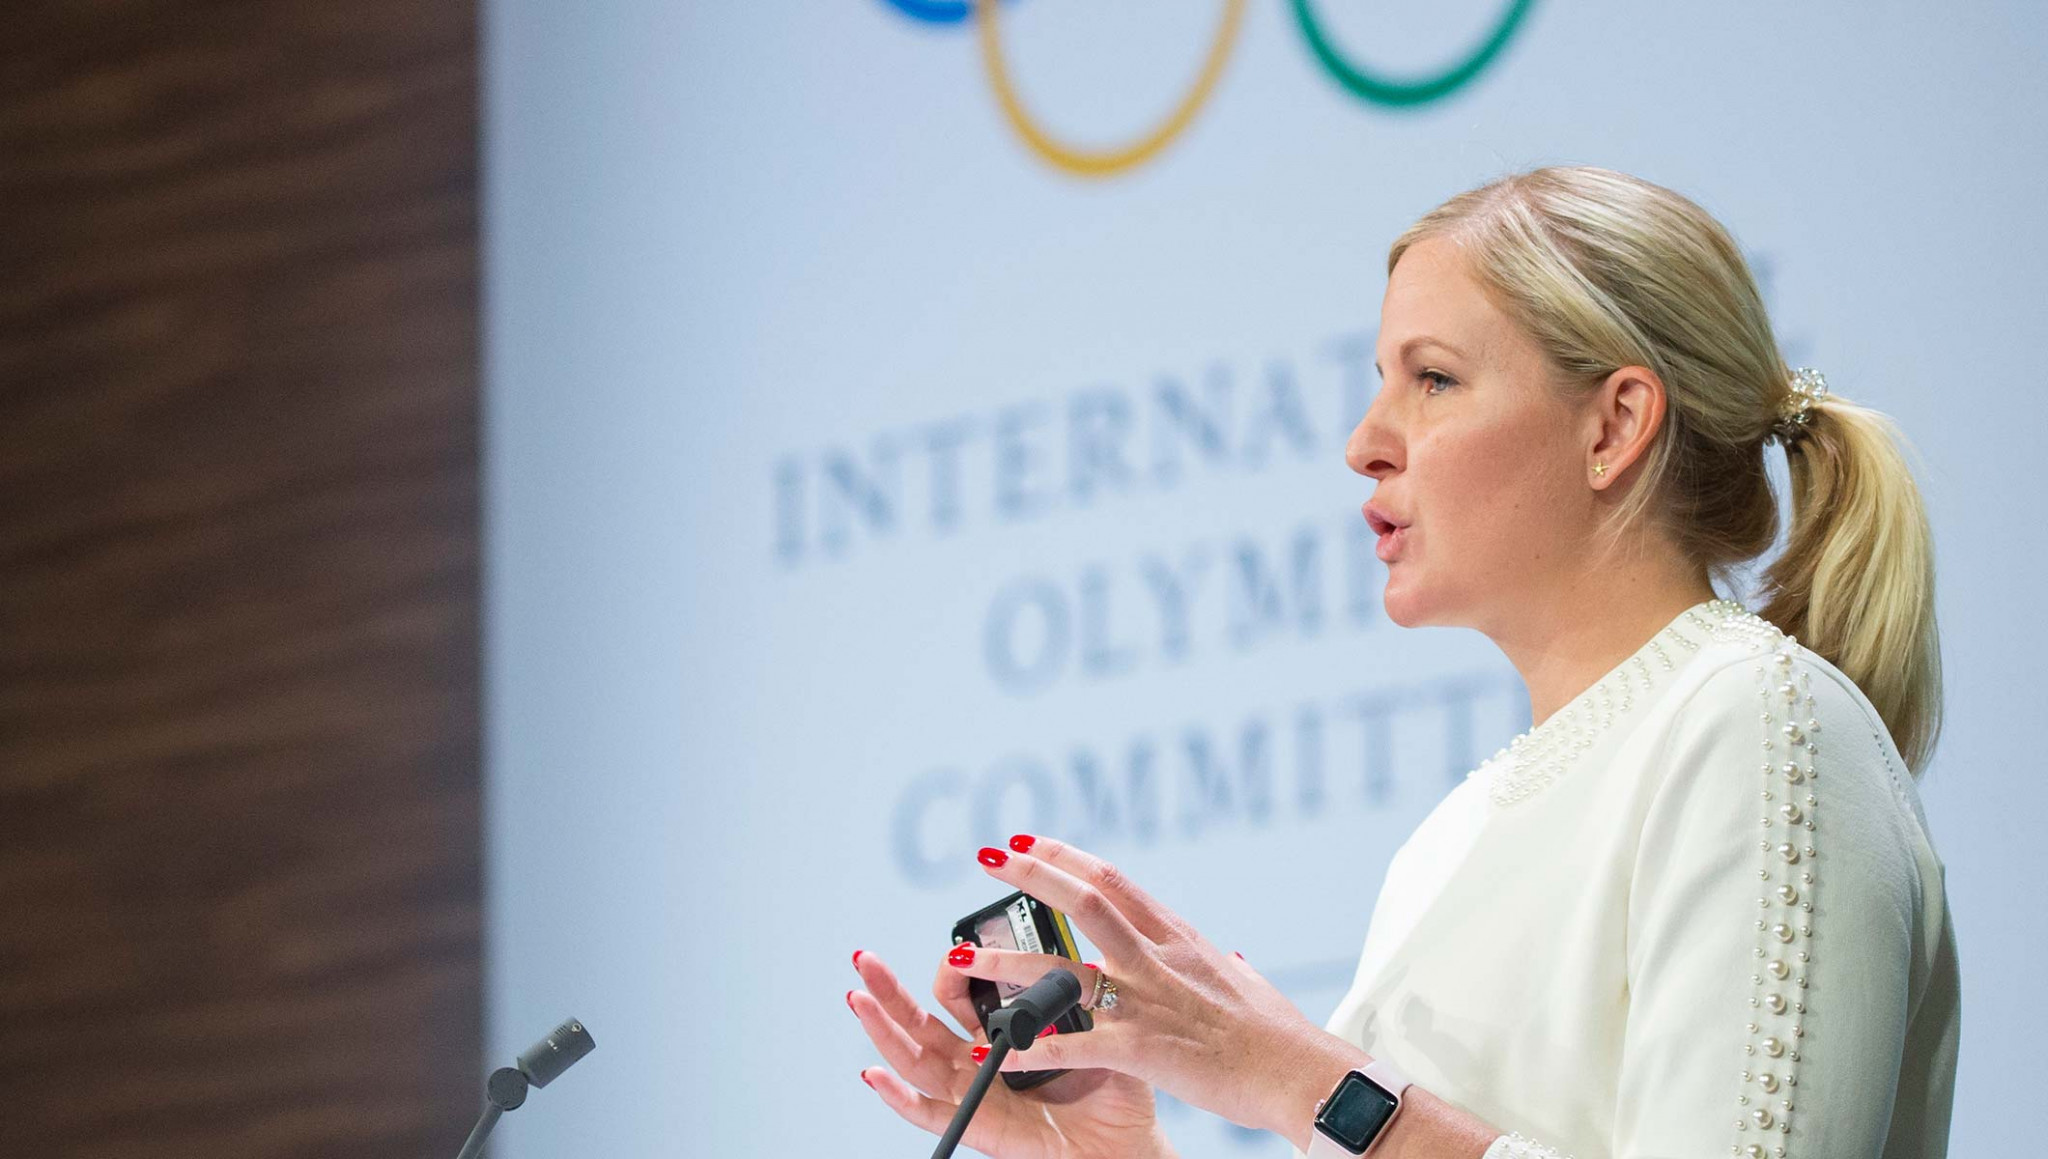 IOC Athletes' Commission chair Kirsty Coventry will be in attendance at the virtual forum ©Getty Images